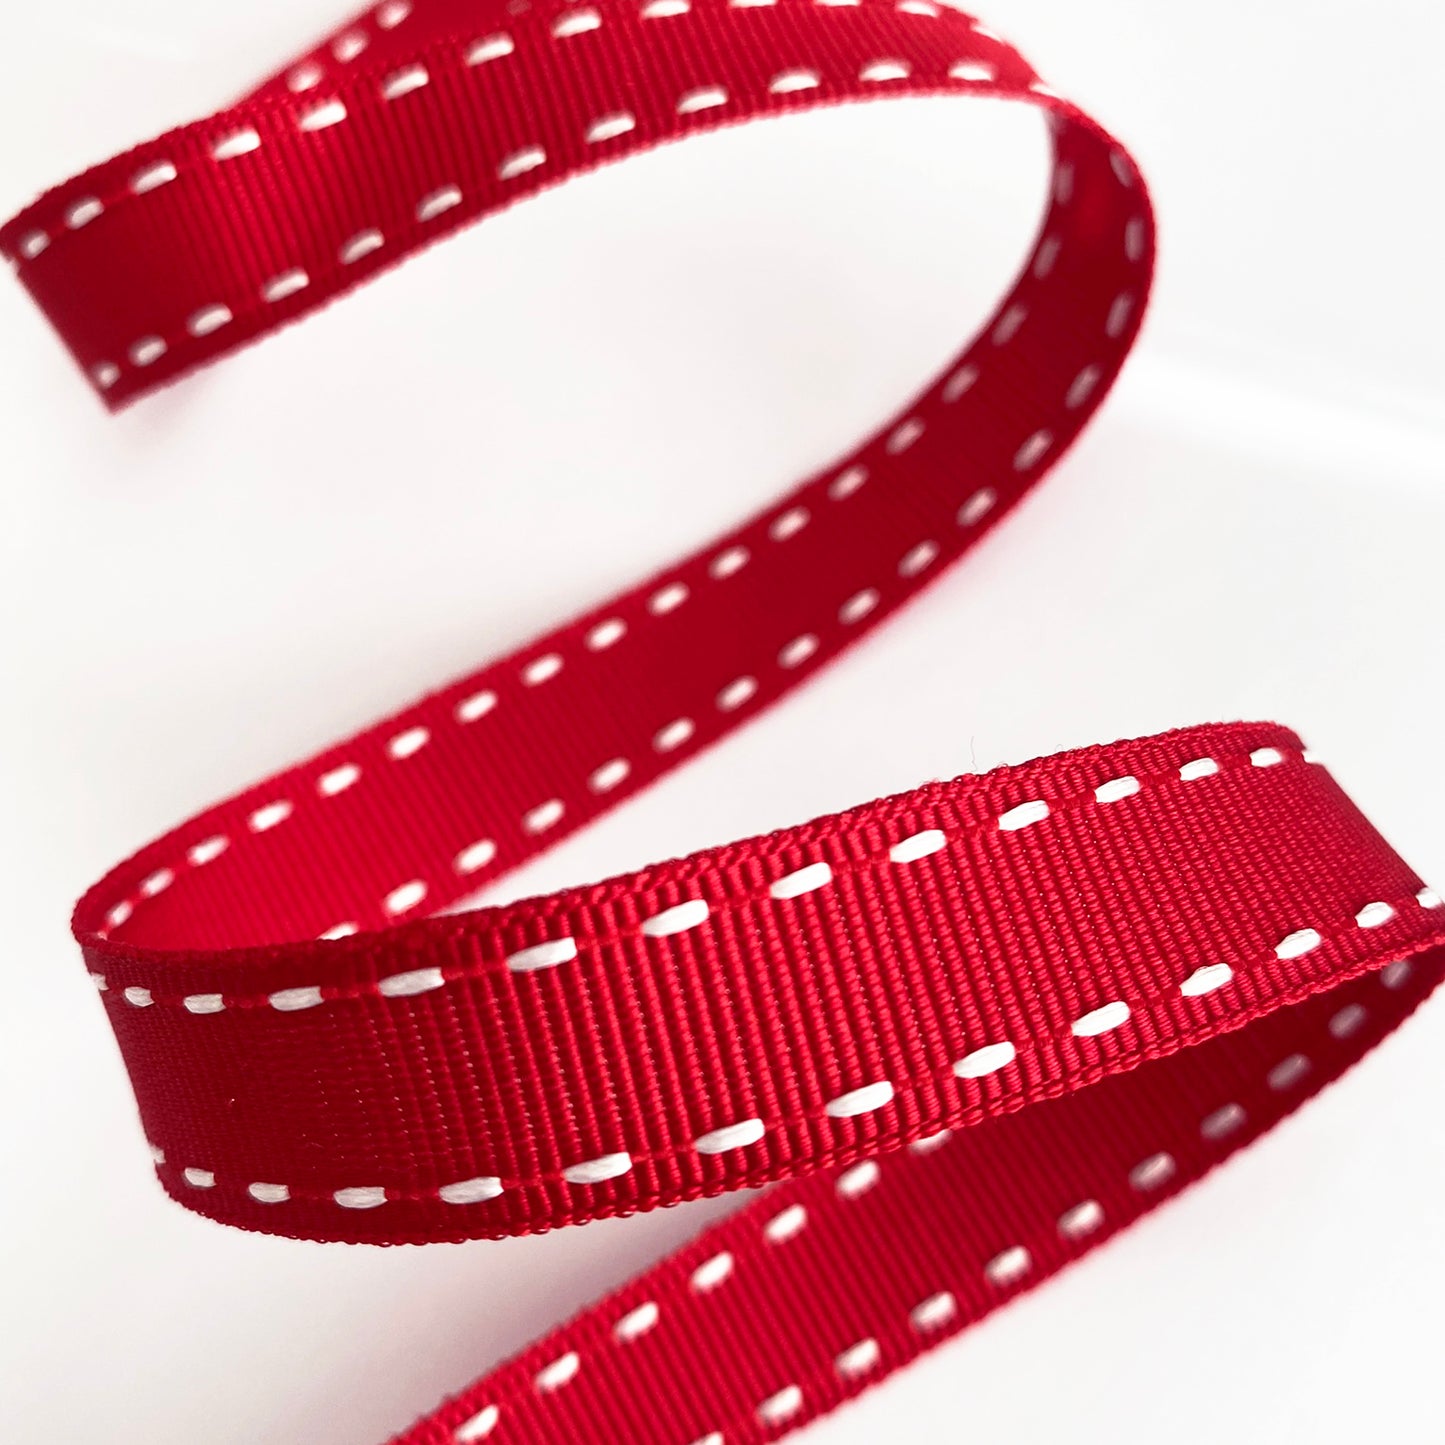 Stitch Ribbon | Red & White Grosgrain | 15mm Wrapping Craft | 1m or Full 15m Roll - SweetpeaStore